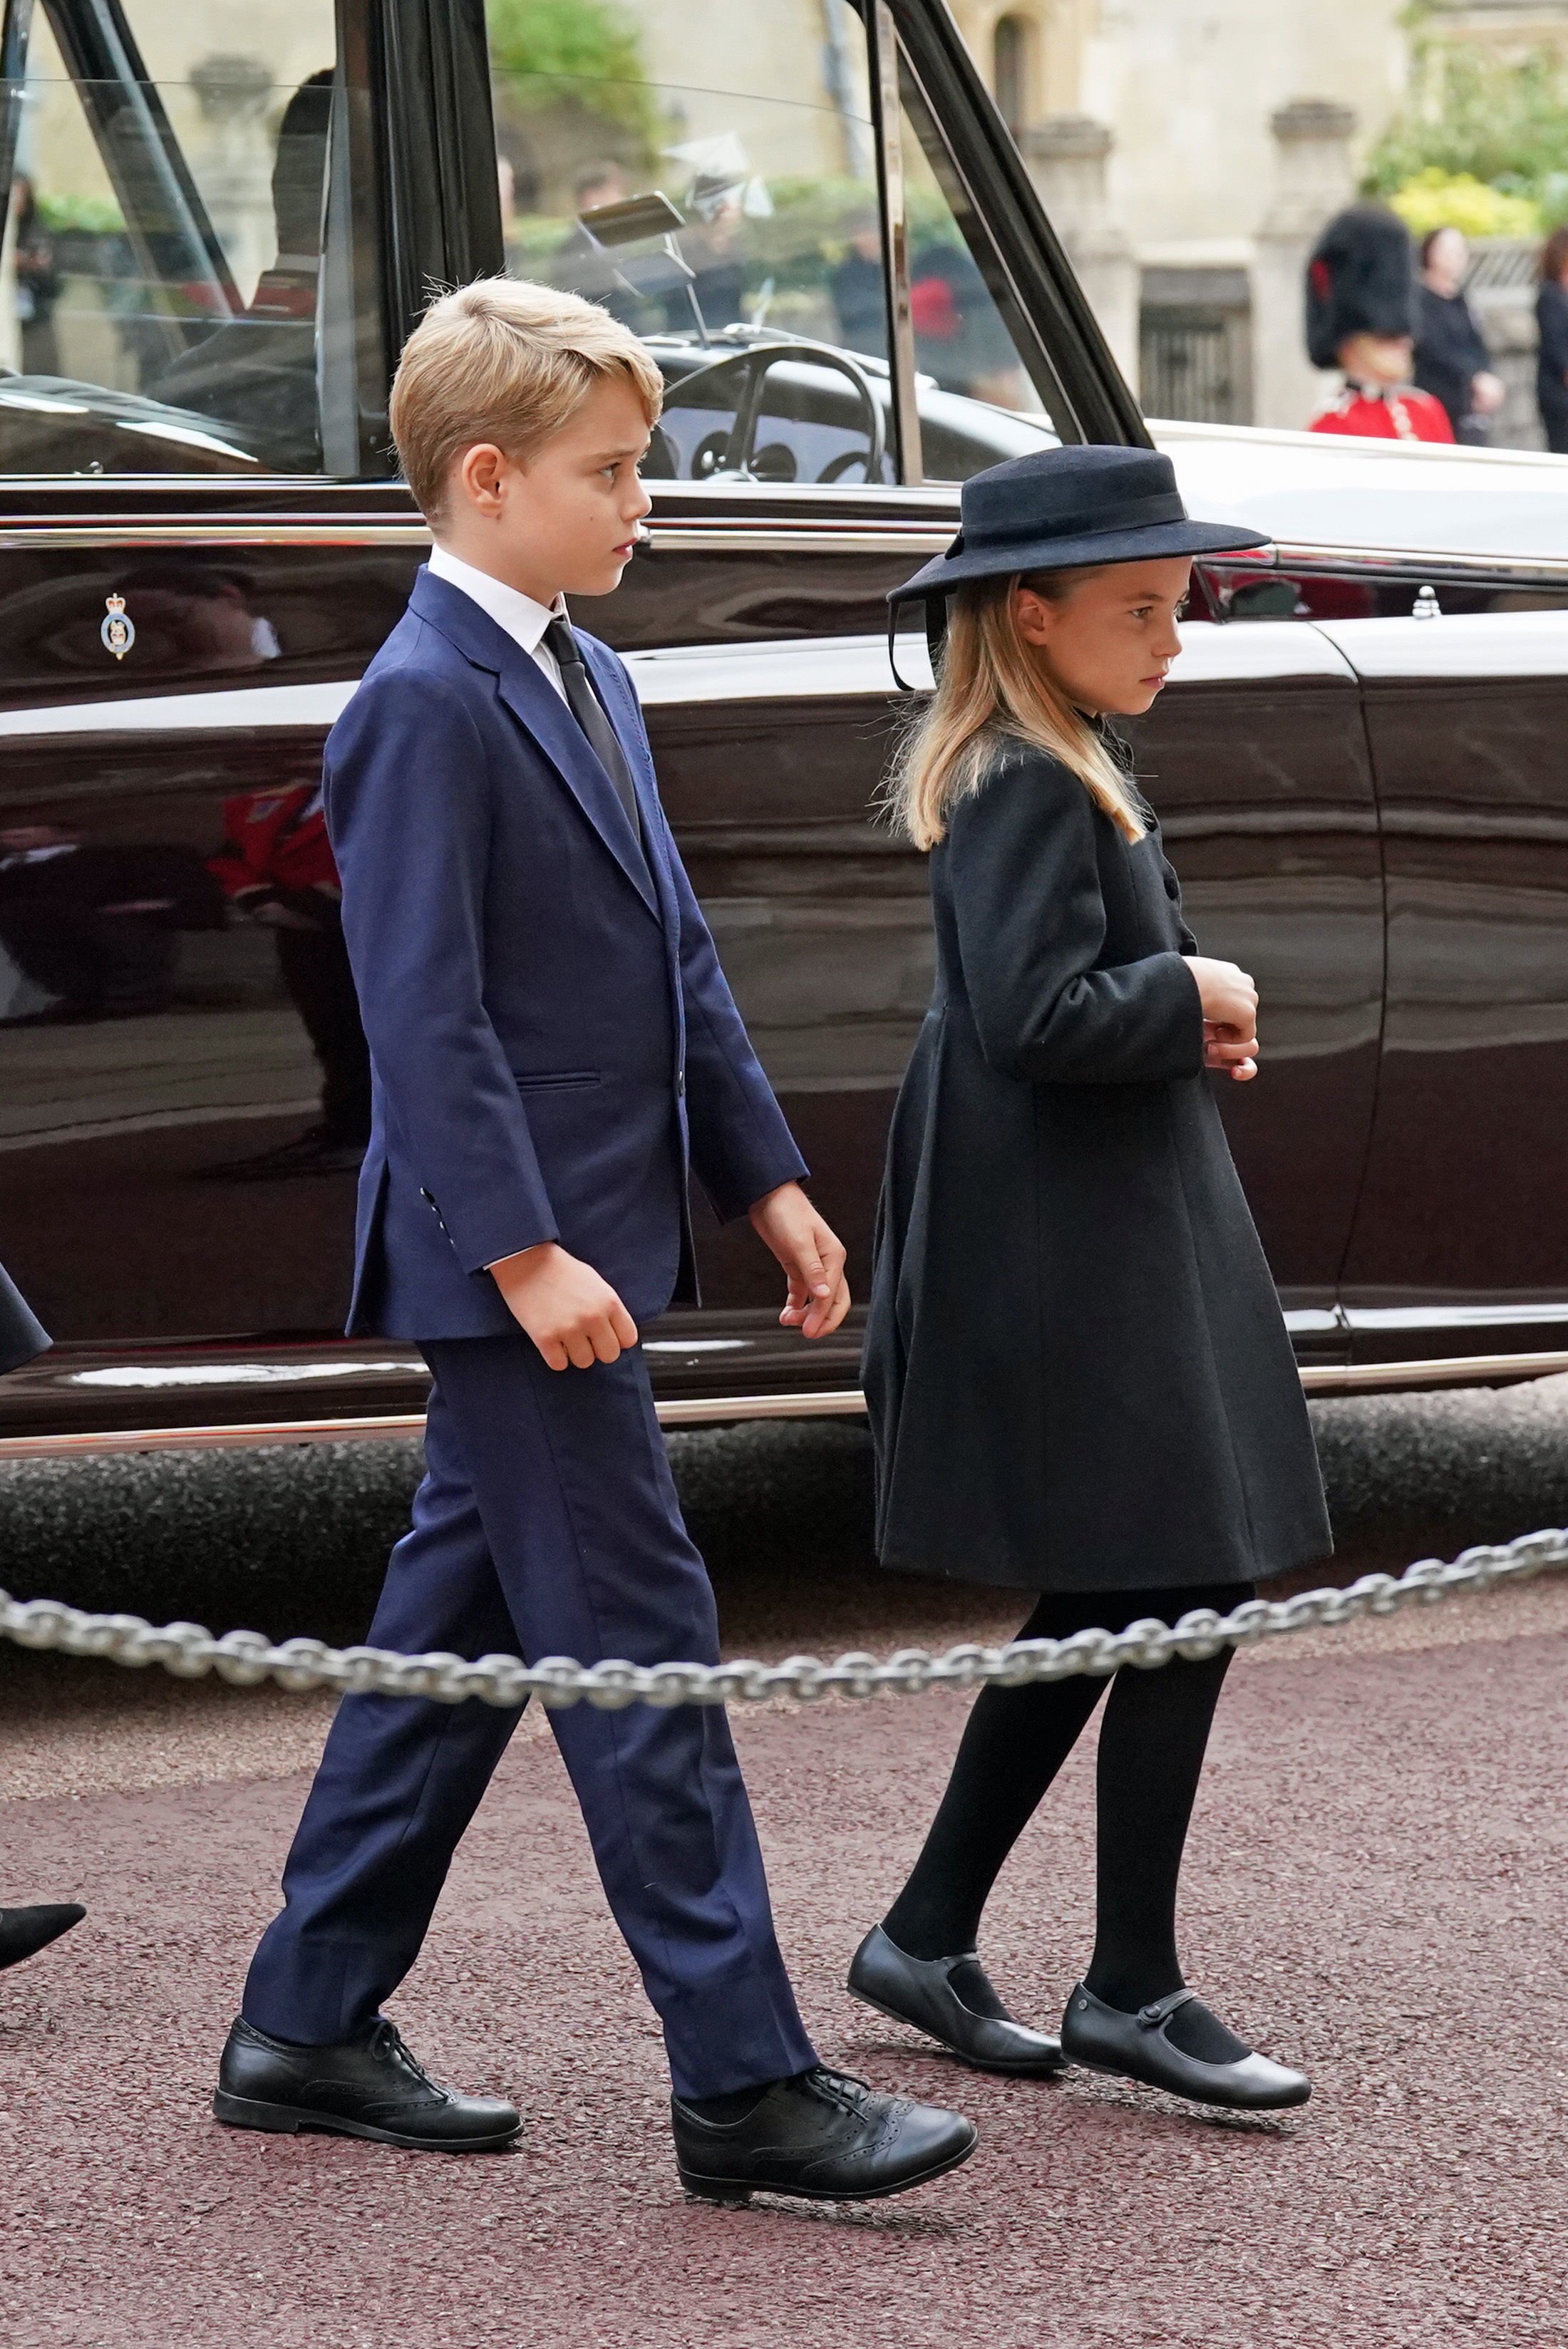 Prince George and Princess Charlotte arrive at the Committal Service for Queen Elizabeth II held at St George's Chapel in Windsor Castle on September 19, 2022 in Windsor, England. | Source: Getty Images